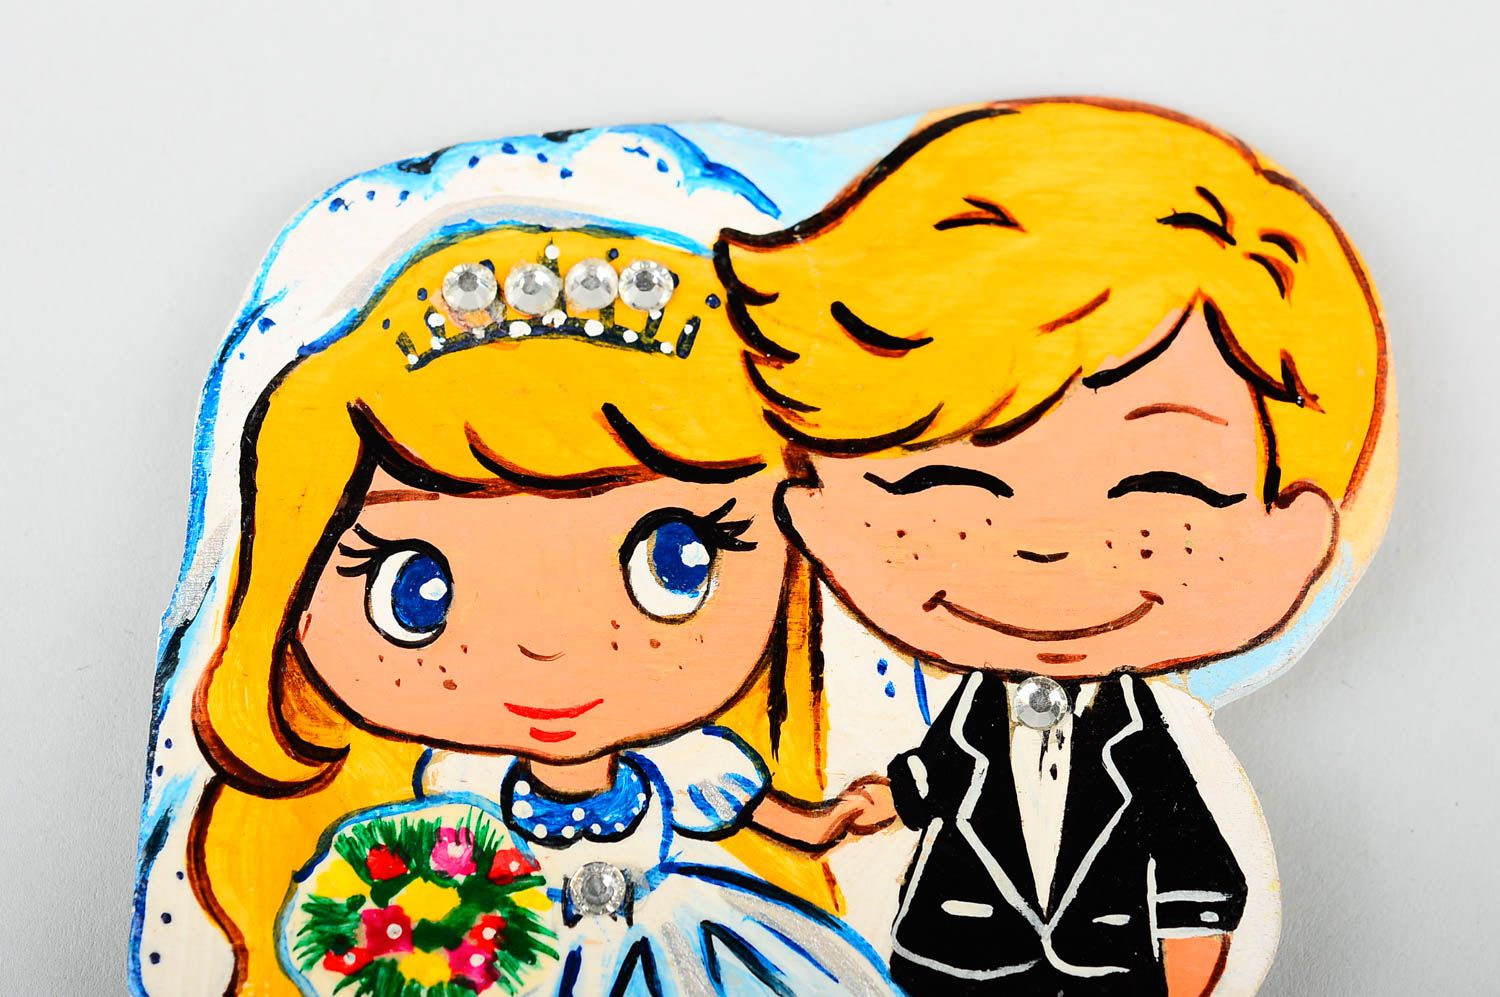 Funny handmade plywood figurine wedding decor cool rooms decorative use only photo 5